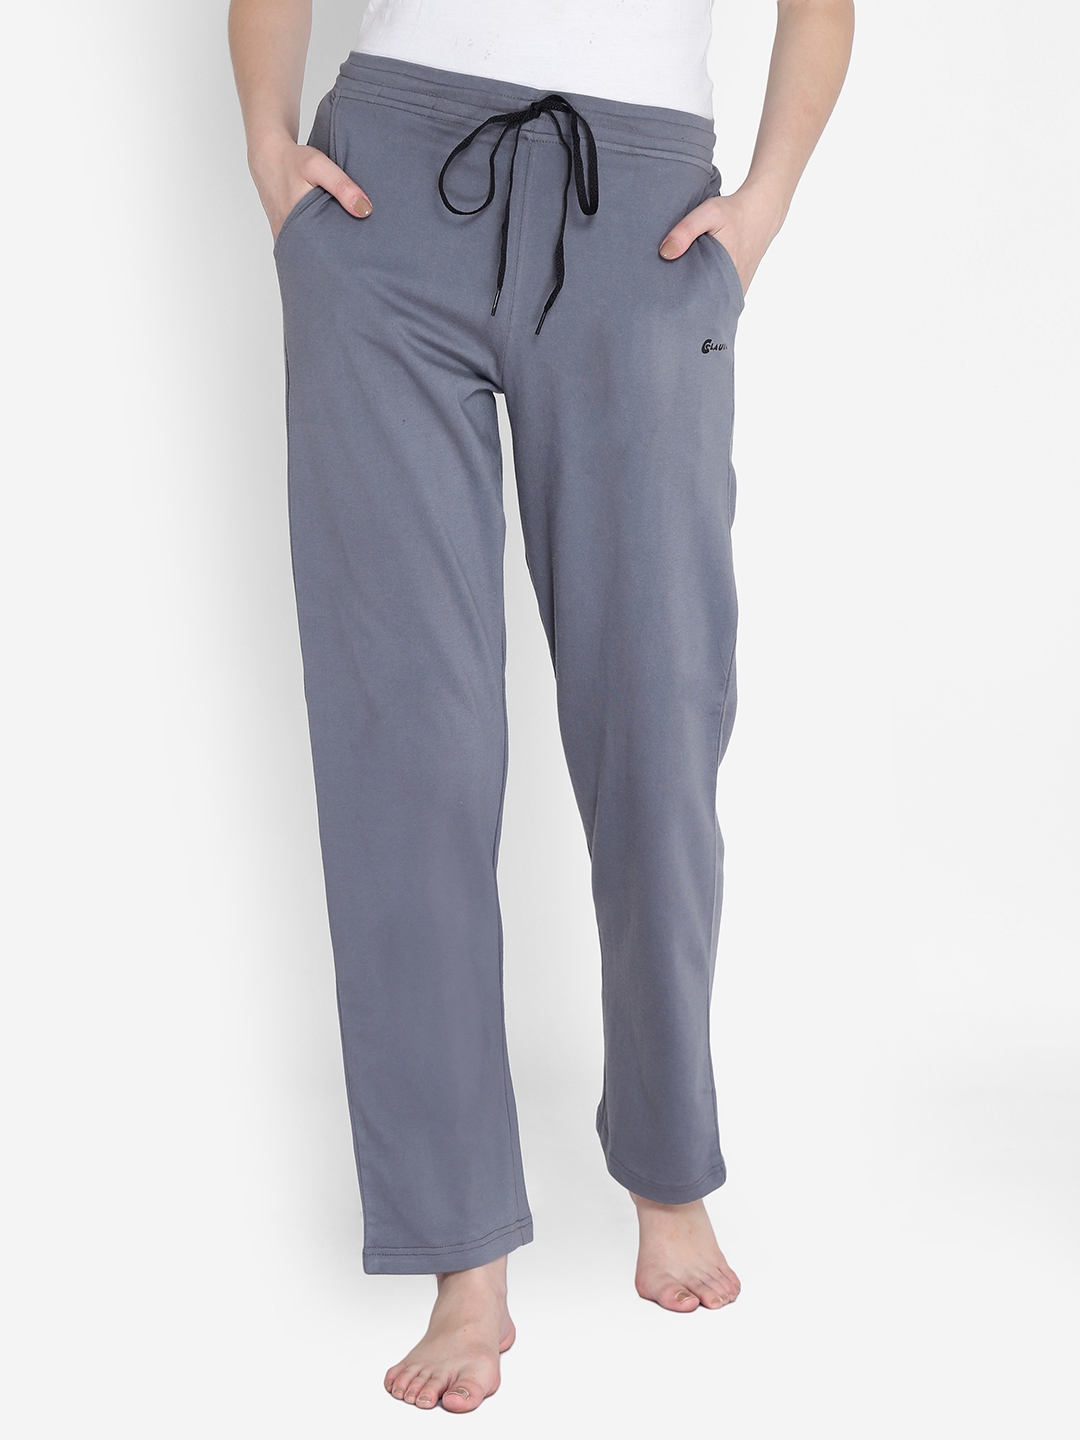 Buy Claura Grey Solid Lounge Pants Lower 11  Lounge Pants for Women  5702441  Myntra